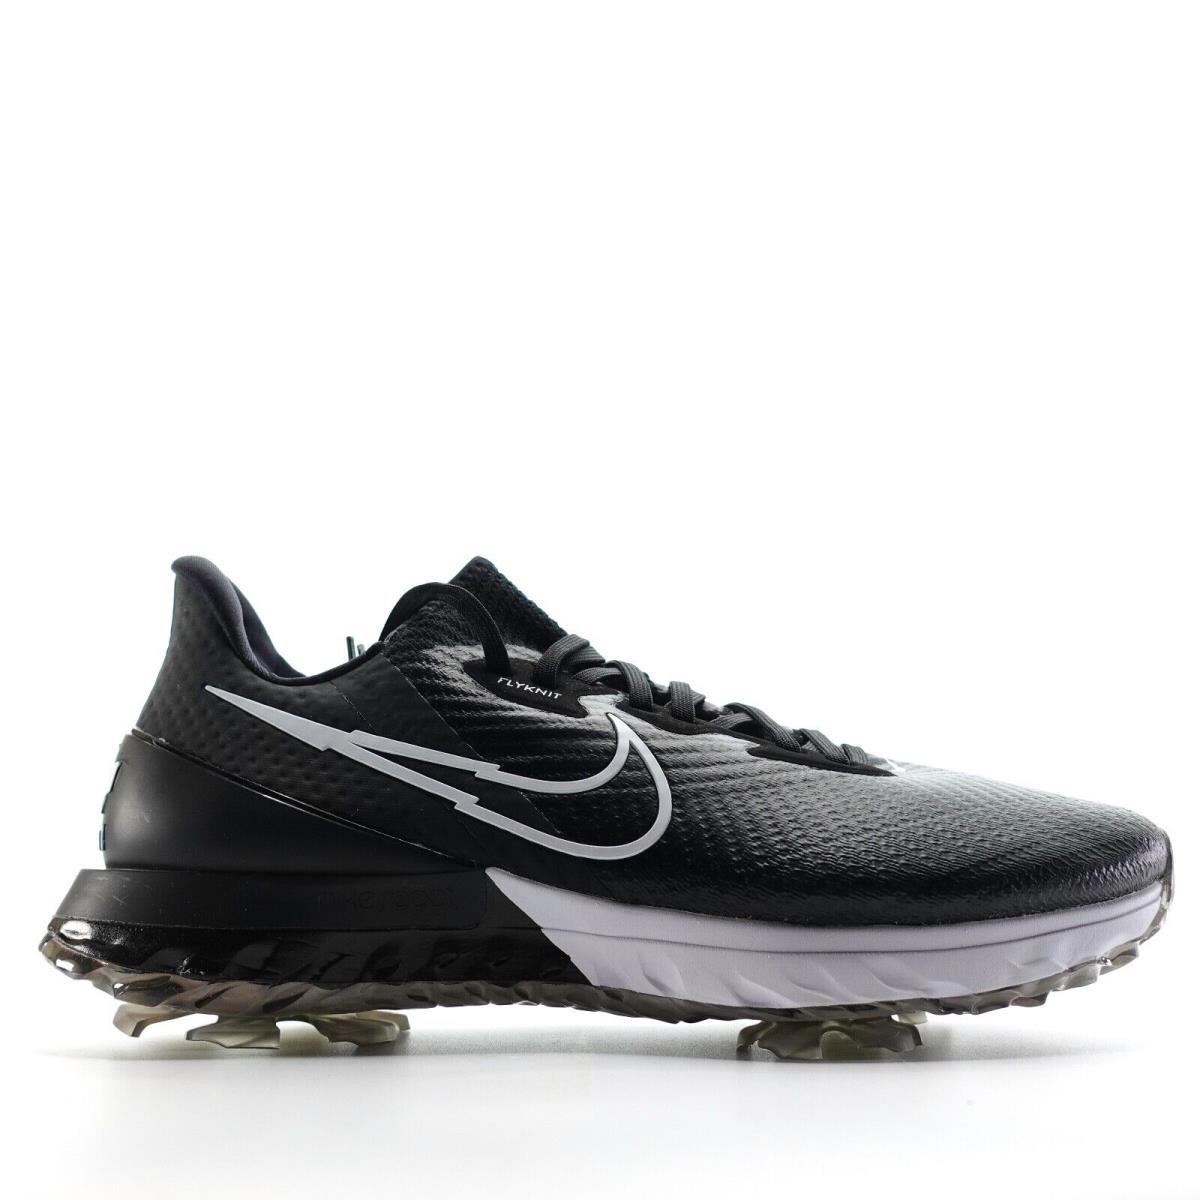 Nike Air Zoom Infinity Tour Golf Shoes Black White CT0540-077 Mens Size 10